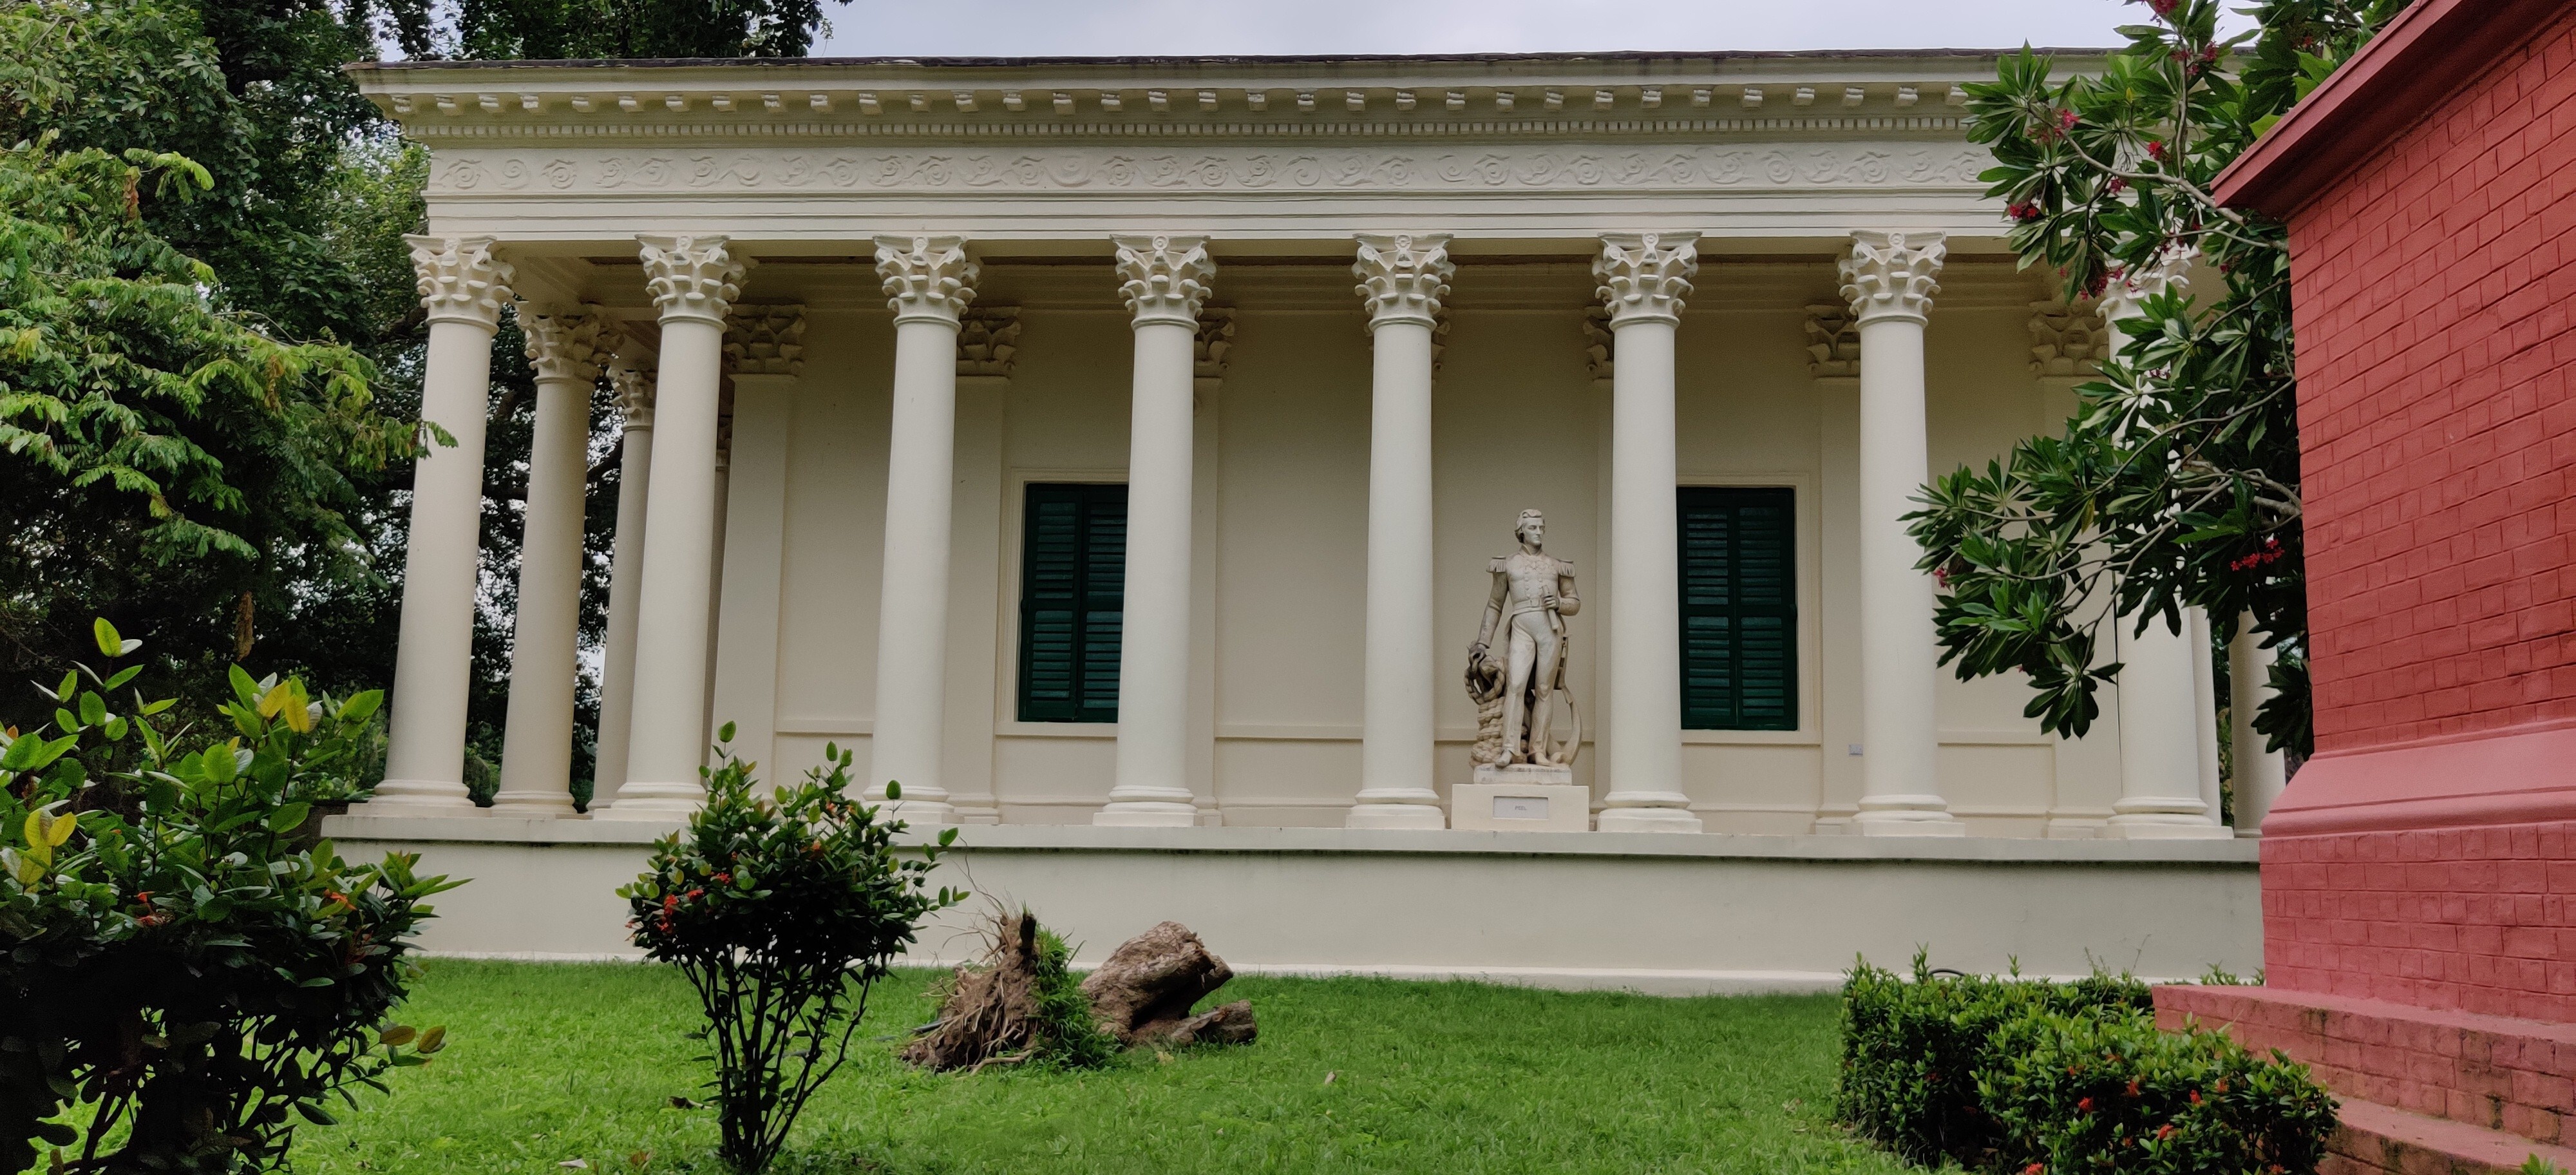 The marble statue of Sir William Peel, which was relocated to Flagstaff House in Barrackpore, after India began removing colonial-era statues. Photo: Sohini C